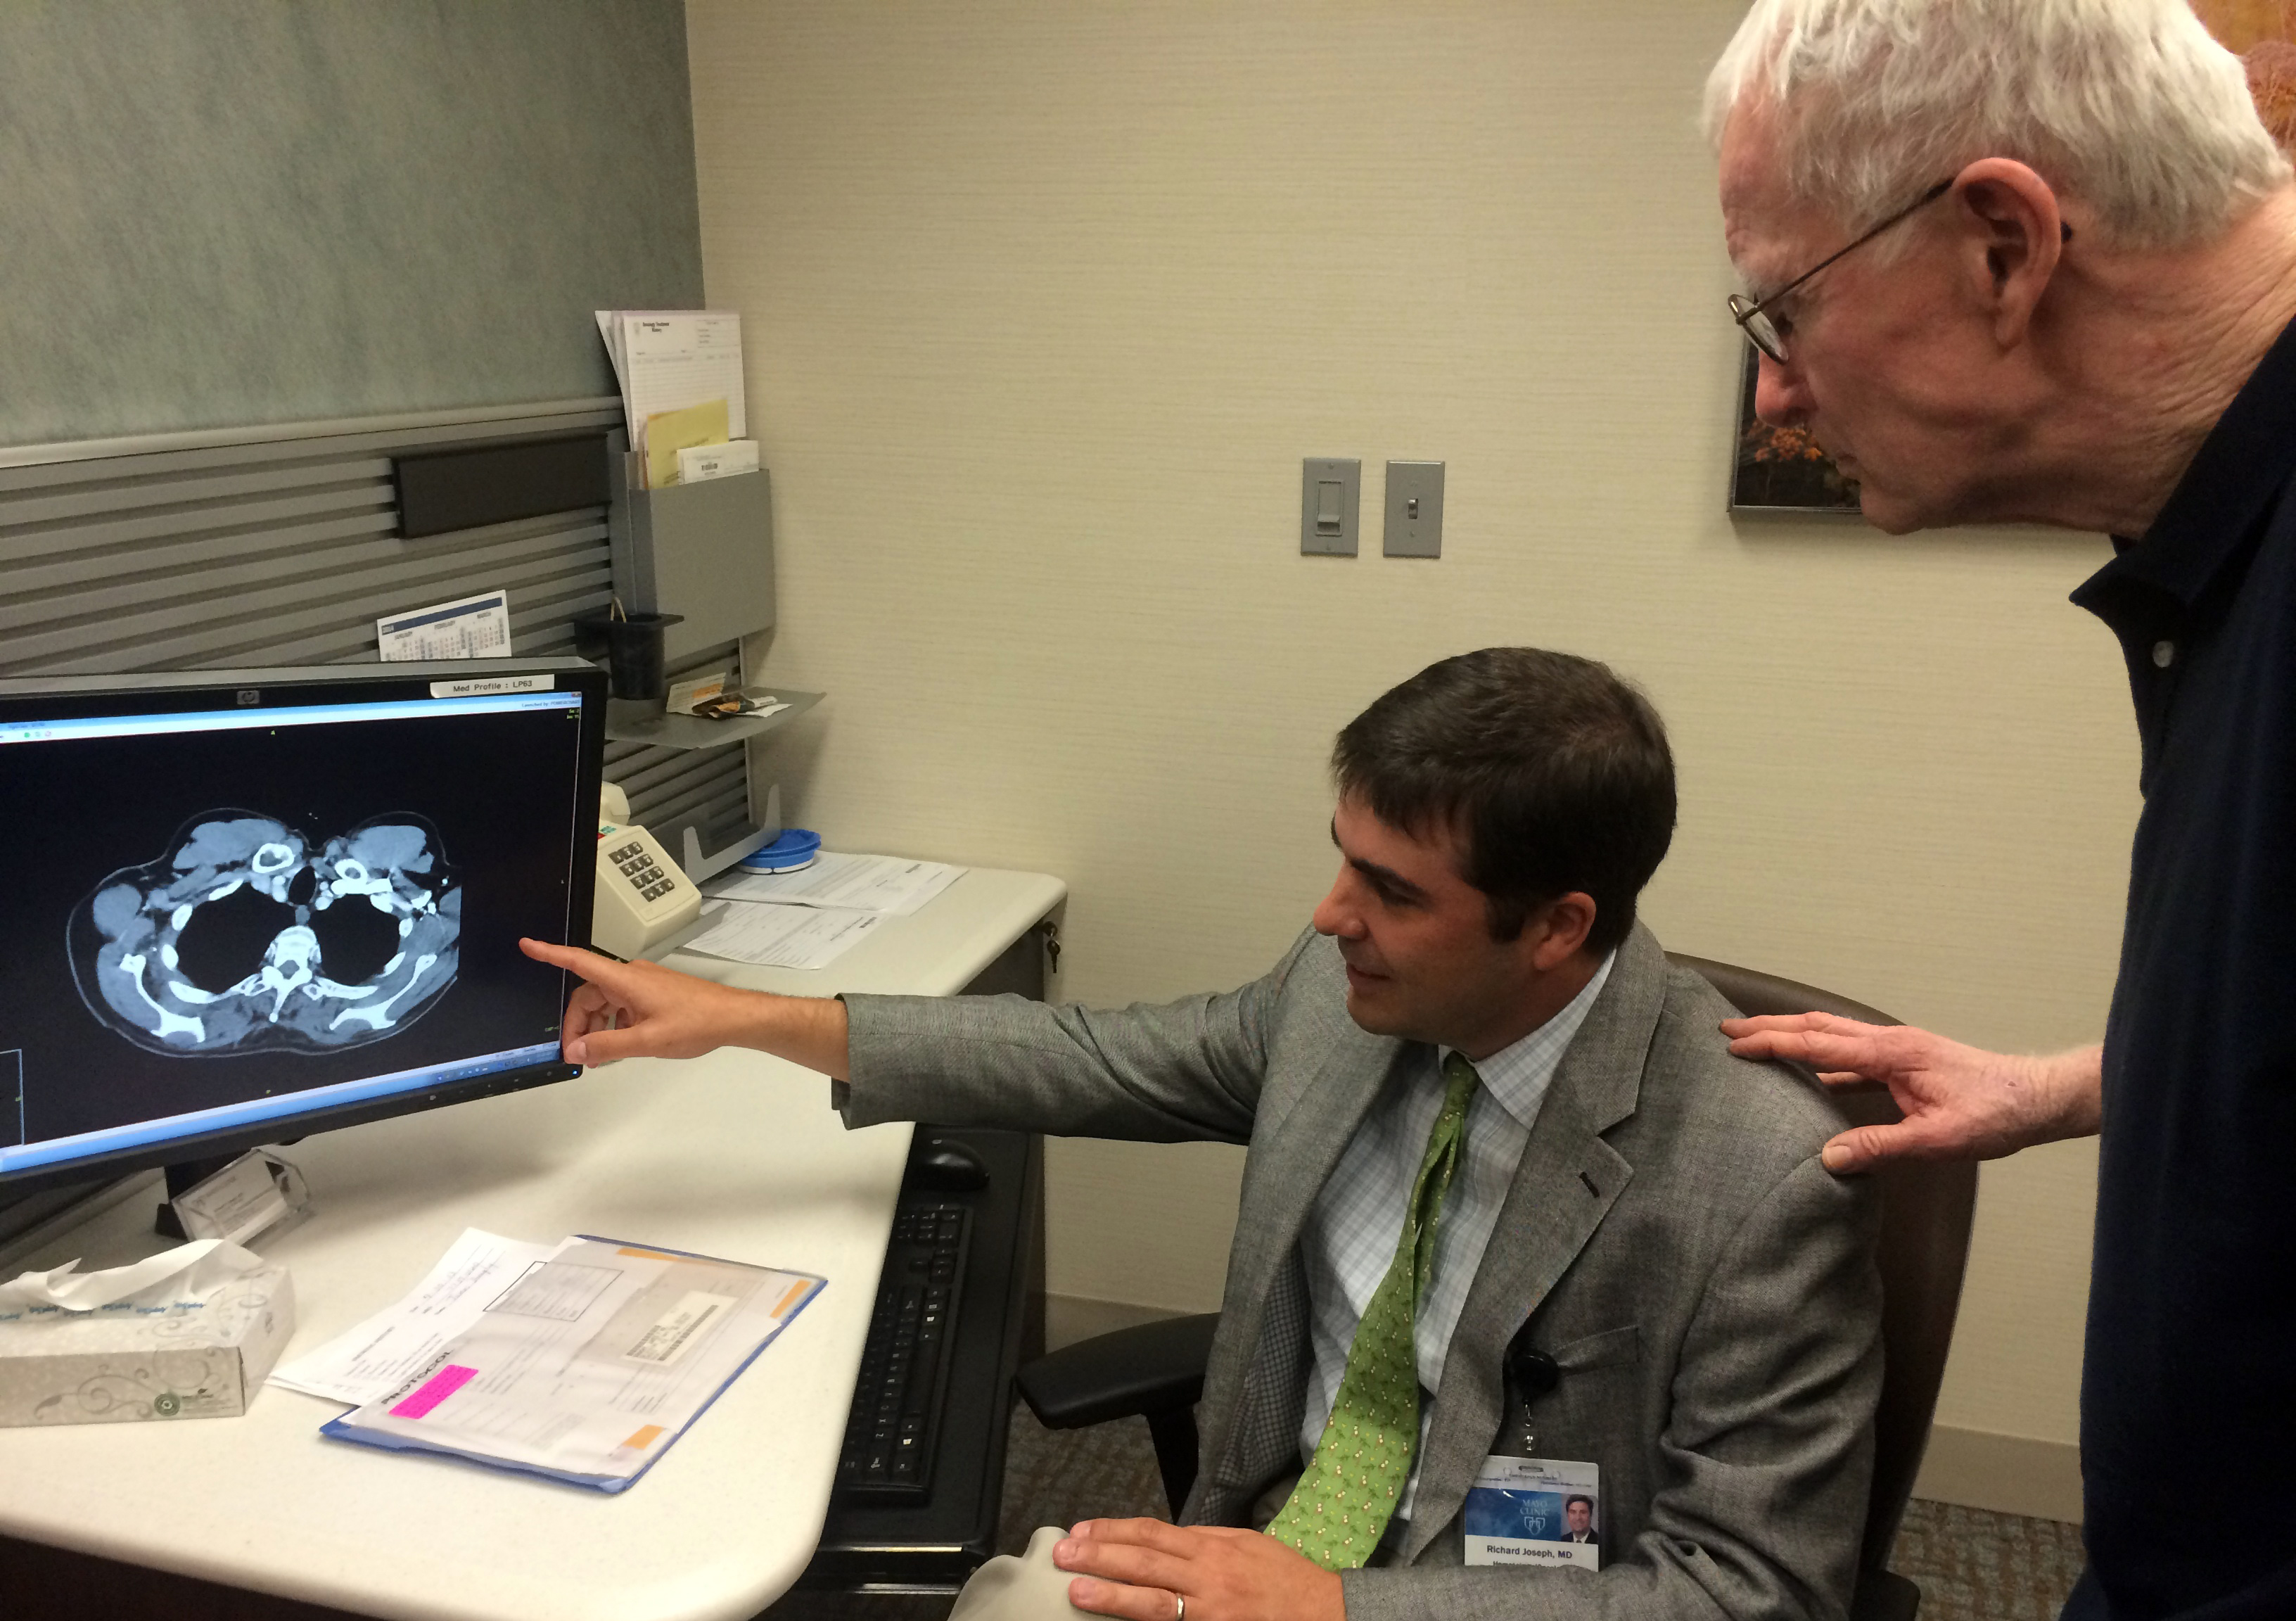 Mayo Clinic in Florida oncologist Richard Joseph, M.D. with Mayo Clinic patient James Donaghy.